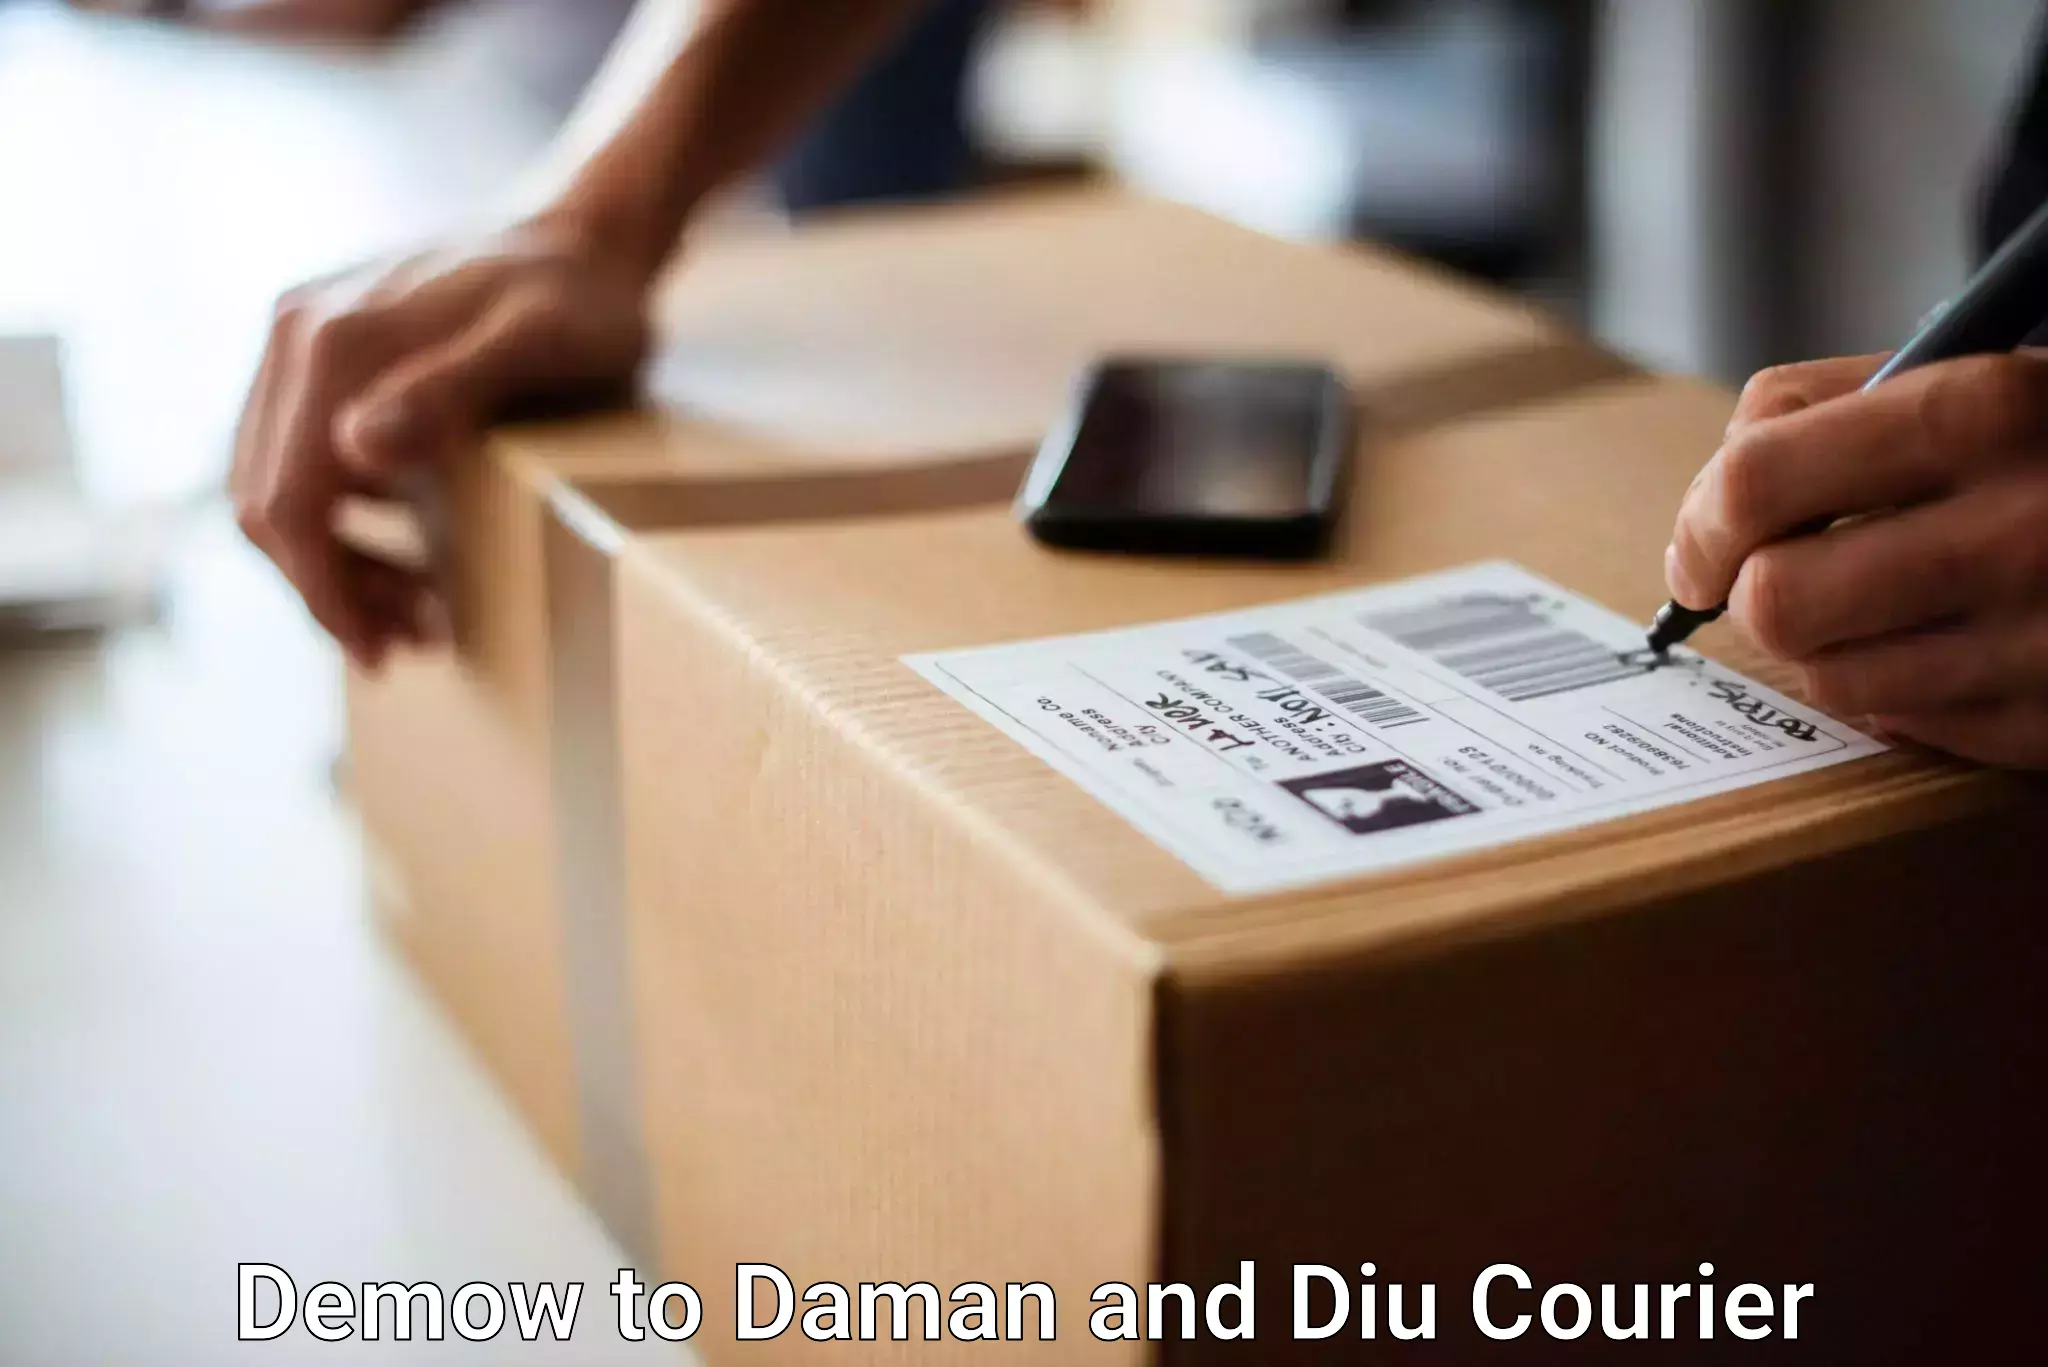 Luggage transport consultancy Demow to Daman and Diu